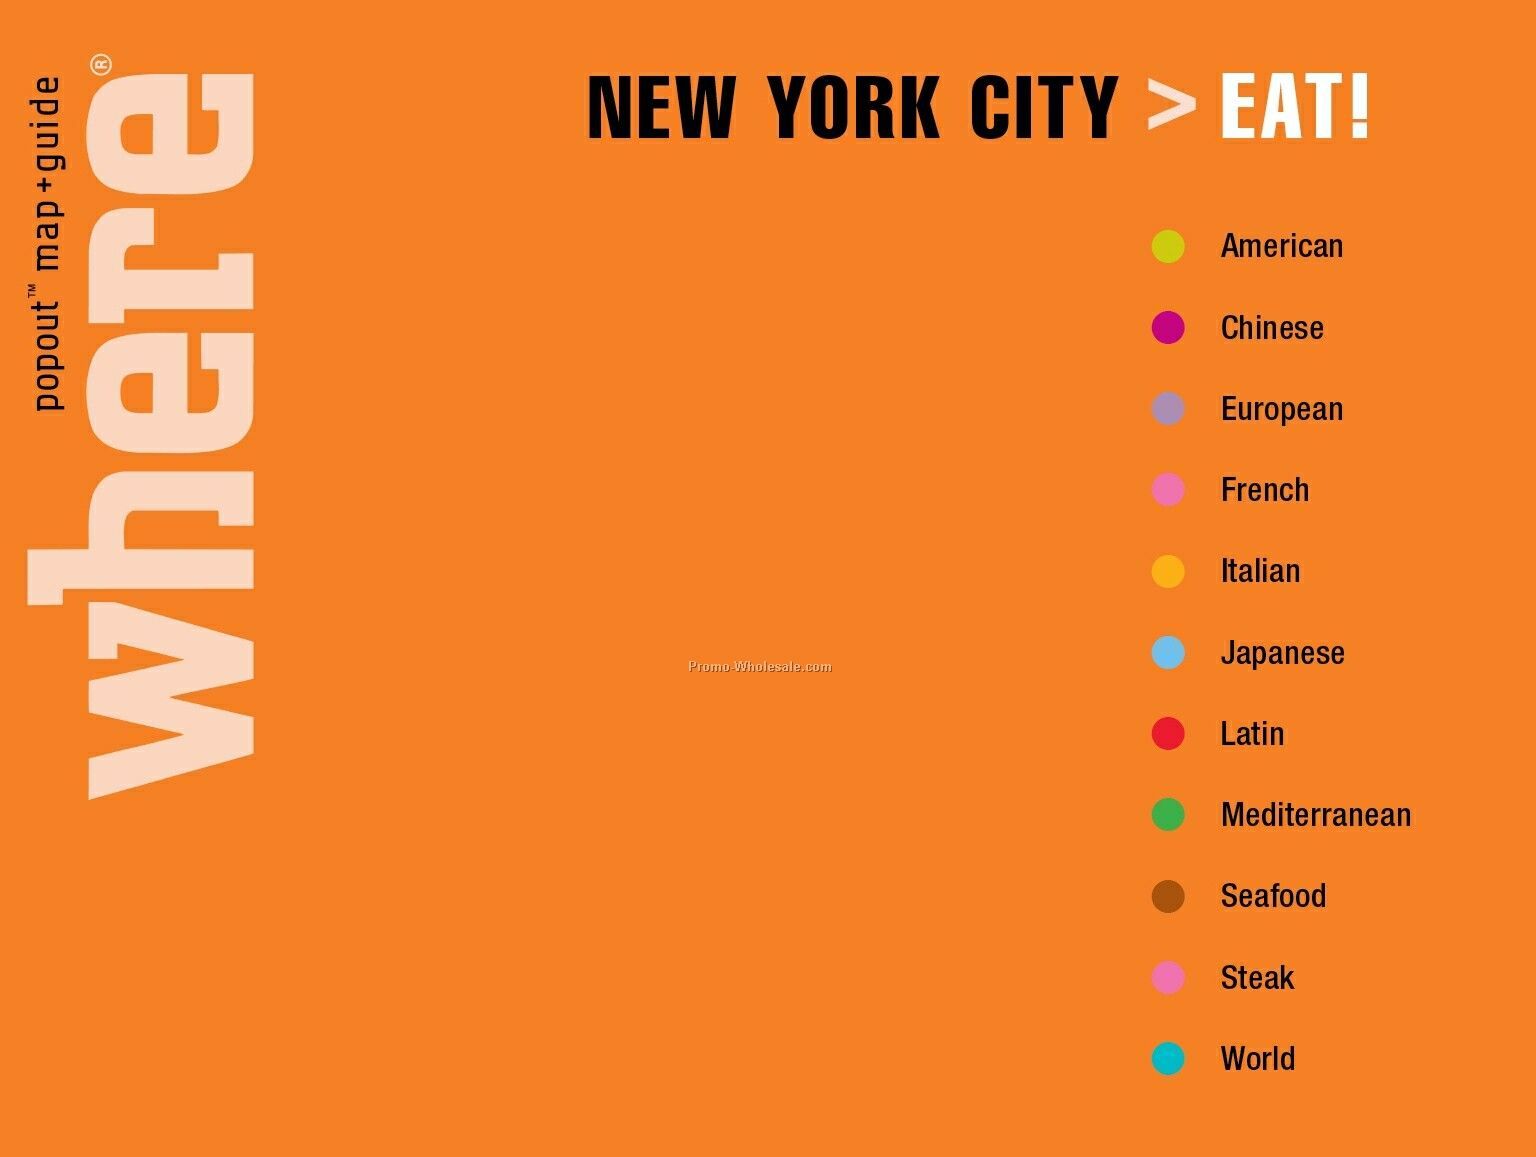 Restaurant Guides - Featuring Popout Maps - Eat! New York